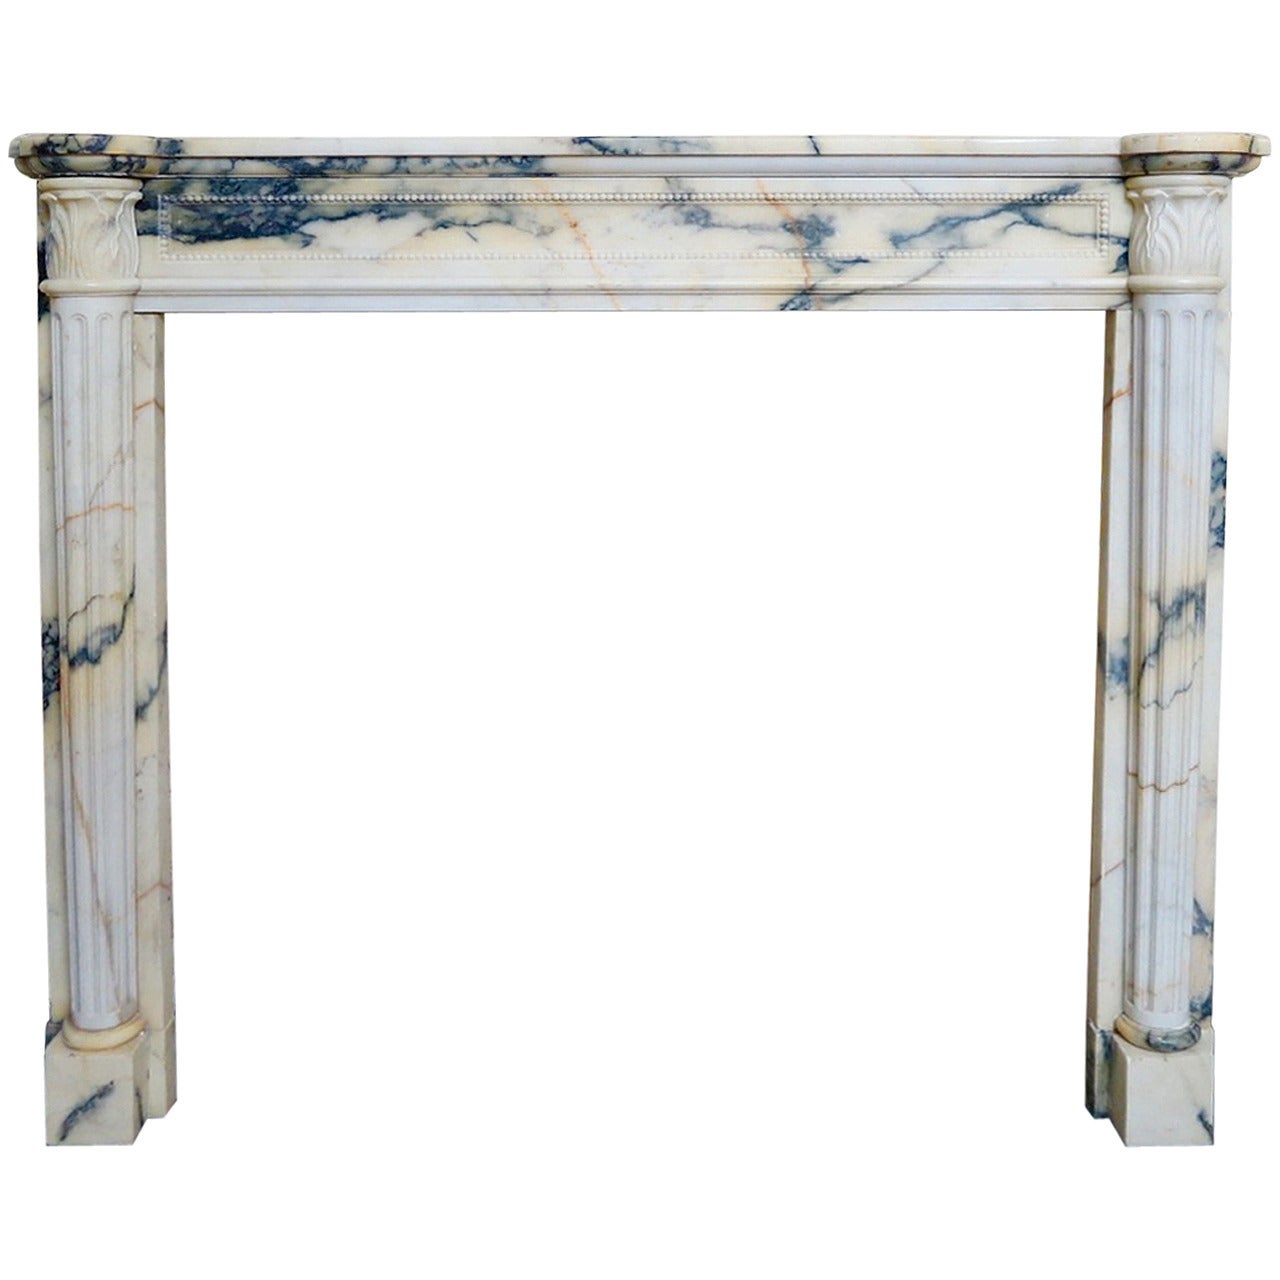 Antique French Louis XVI Style Fireplace Mantel in Panazeau Marble